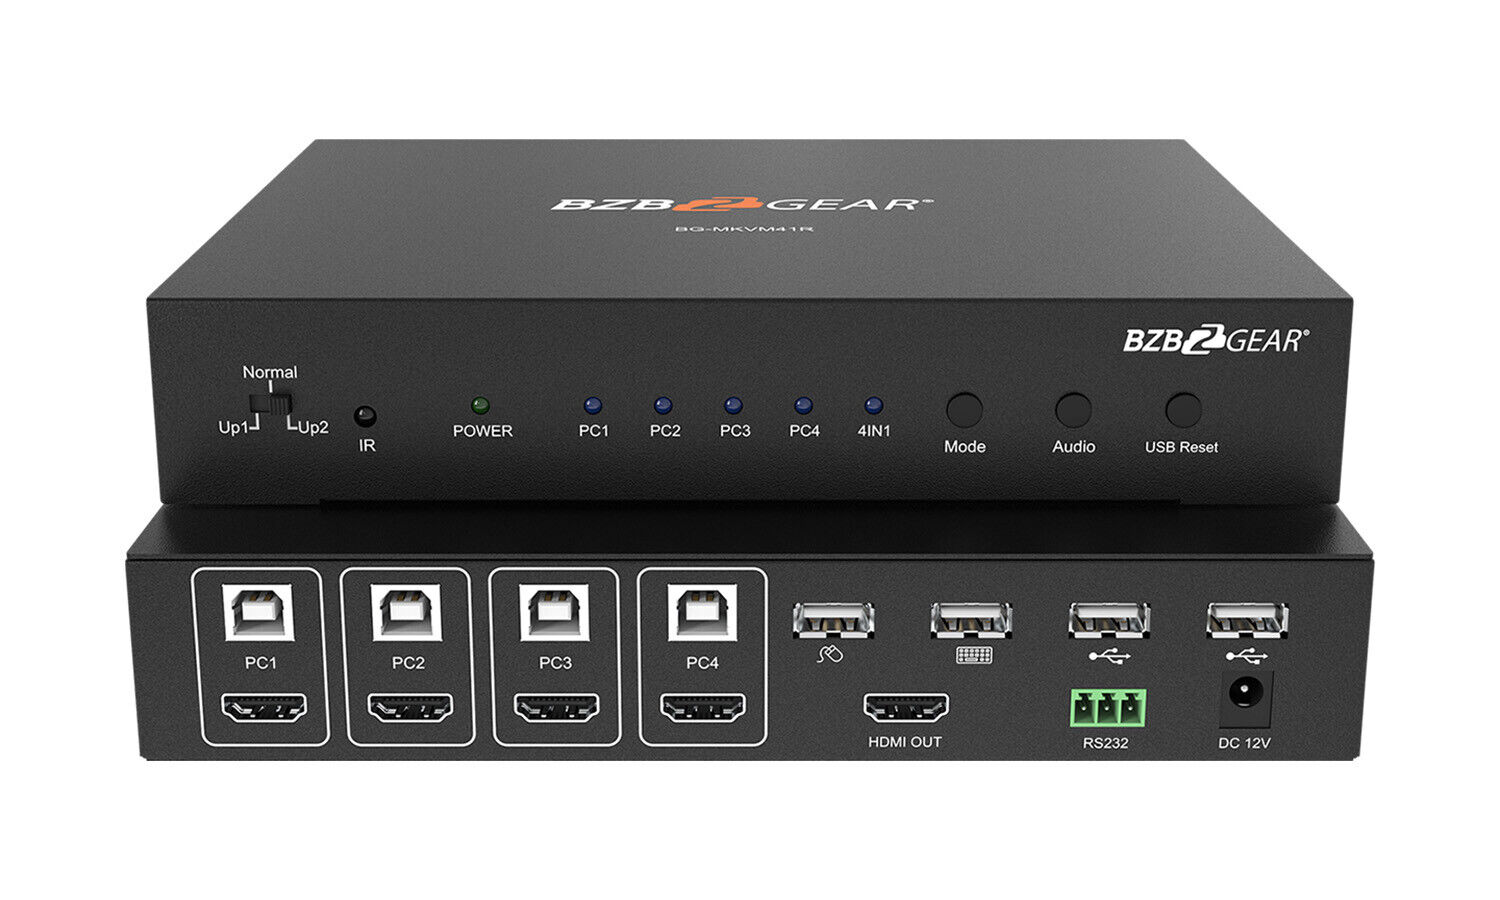 BZBGEAR 4x1 1080P FHD HDMI MultiViewer with KVM USB2.0 Ports/Up to 4 Computers